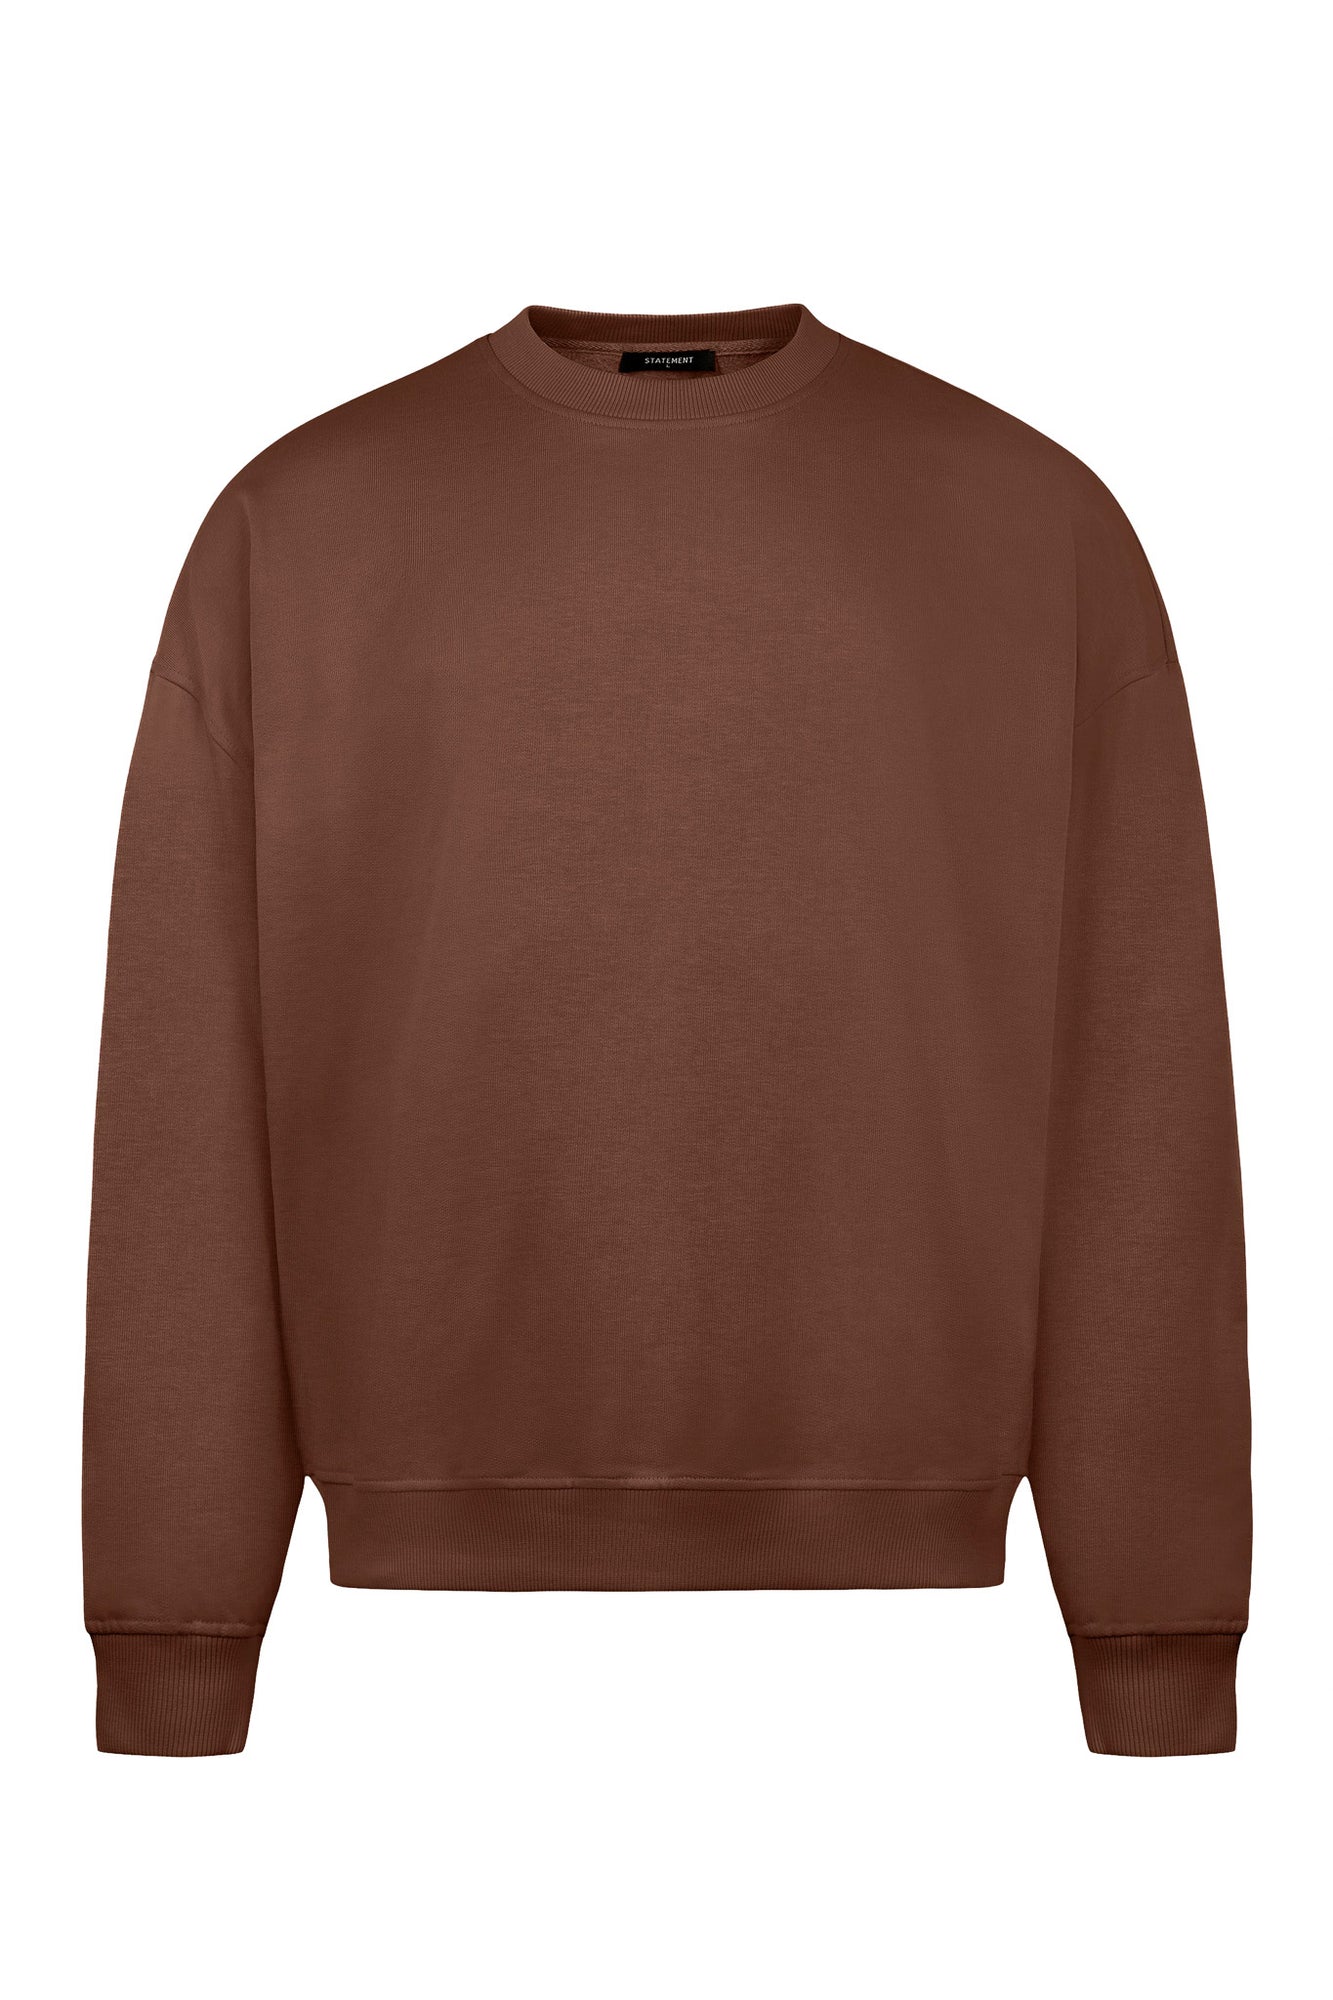 EXCHANGE SWEATER (COFFEE BROWN)